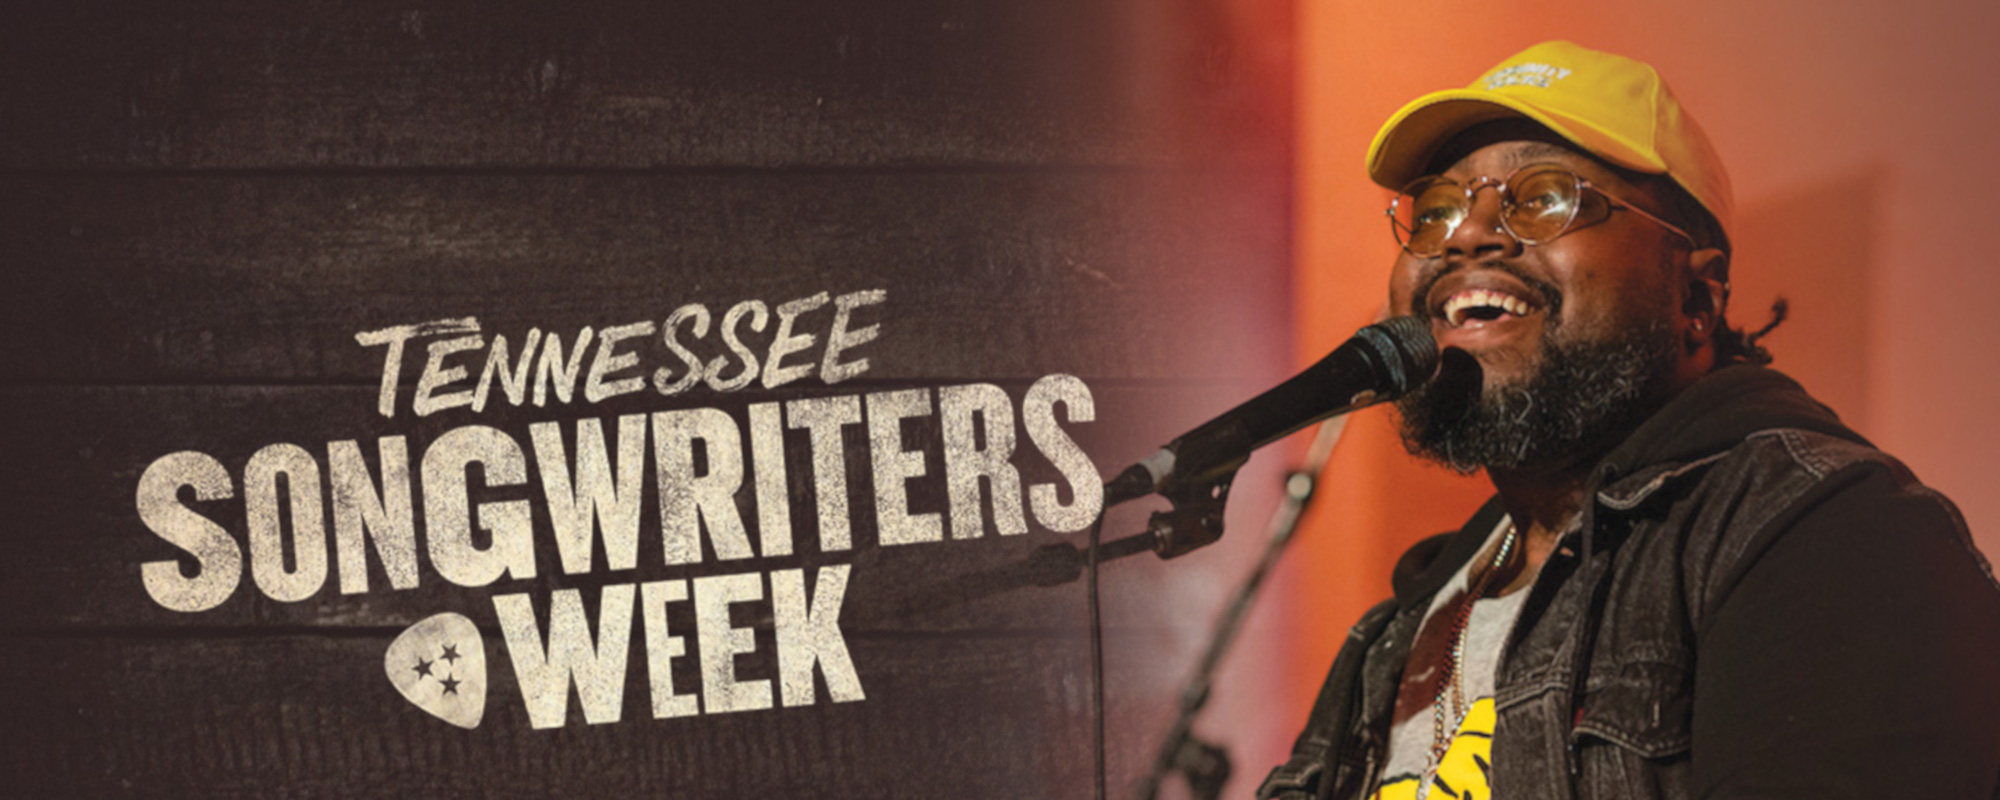 Tennessee Songwriters Week is Back: Here’s What You Should Know